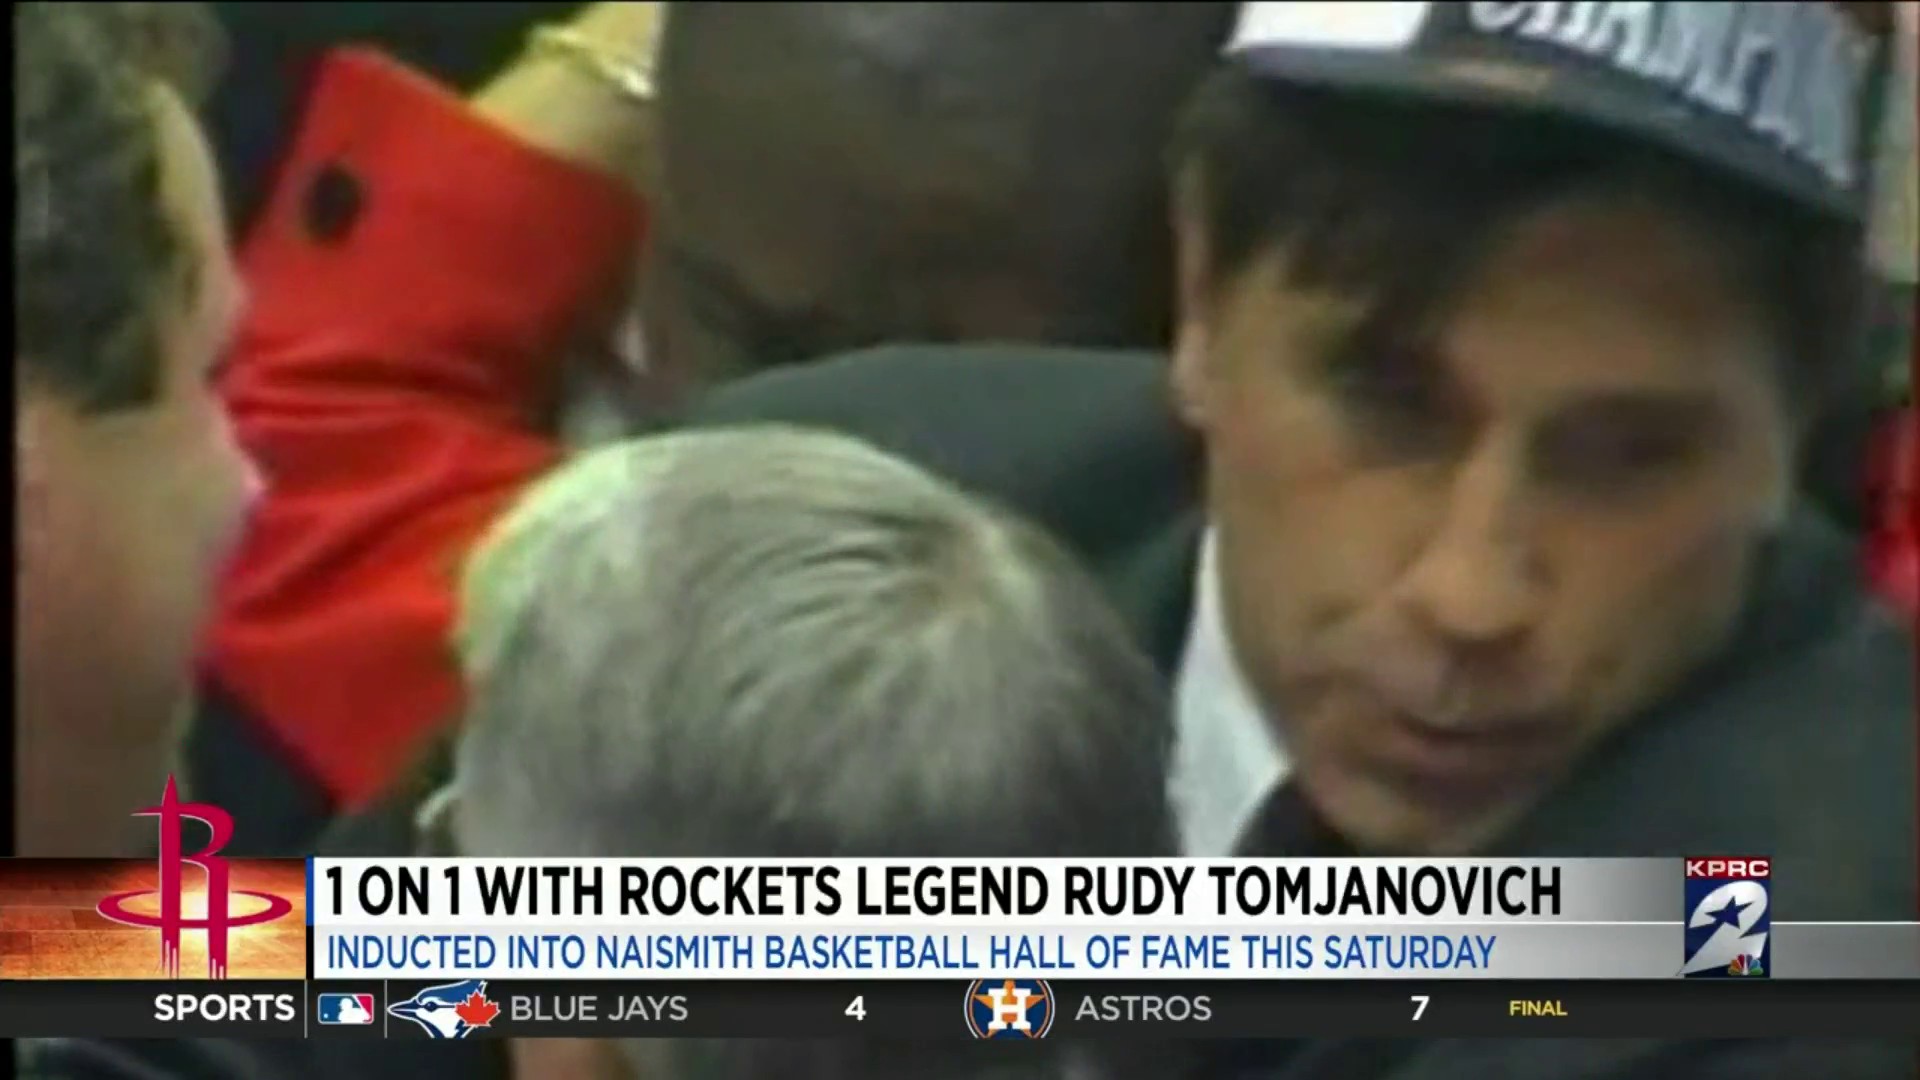 Rudy Tomjanovich to get his spot in Naismith Basketball Hall of Fame